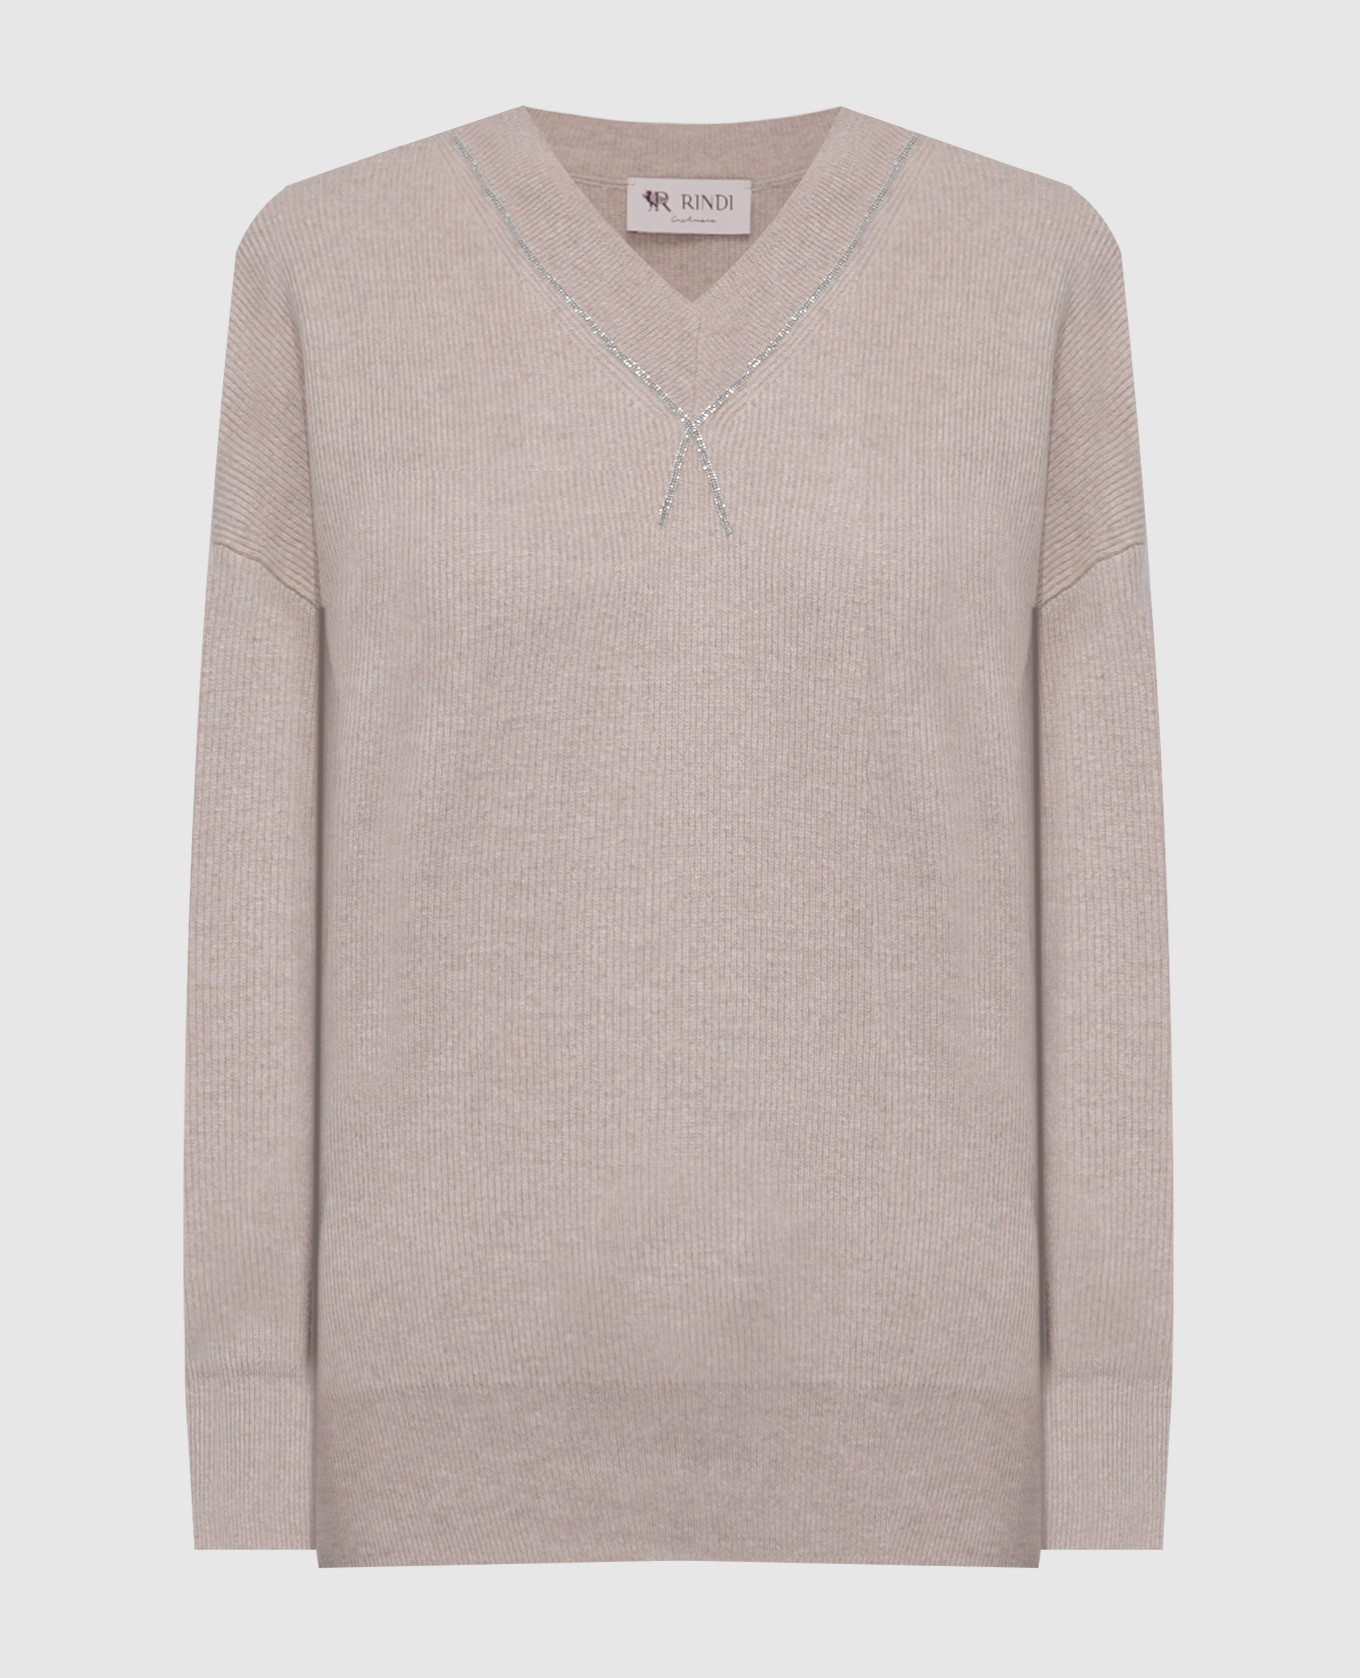 Beige wool and cashmere pullover with monil chain